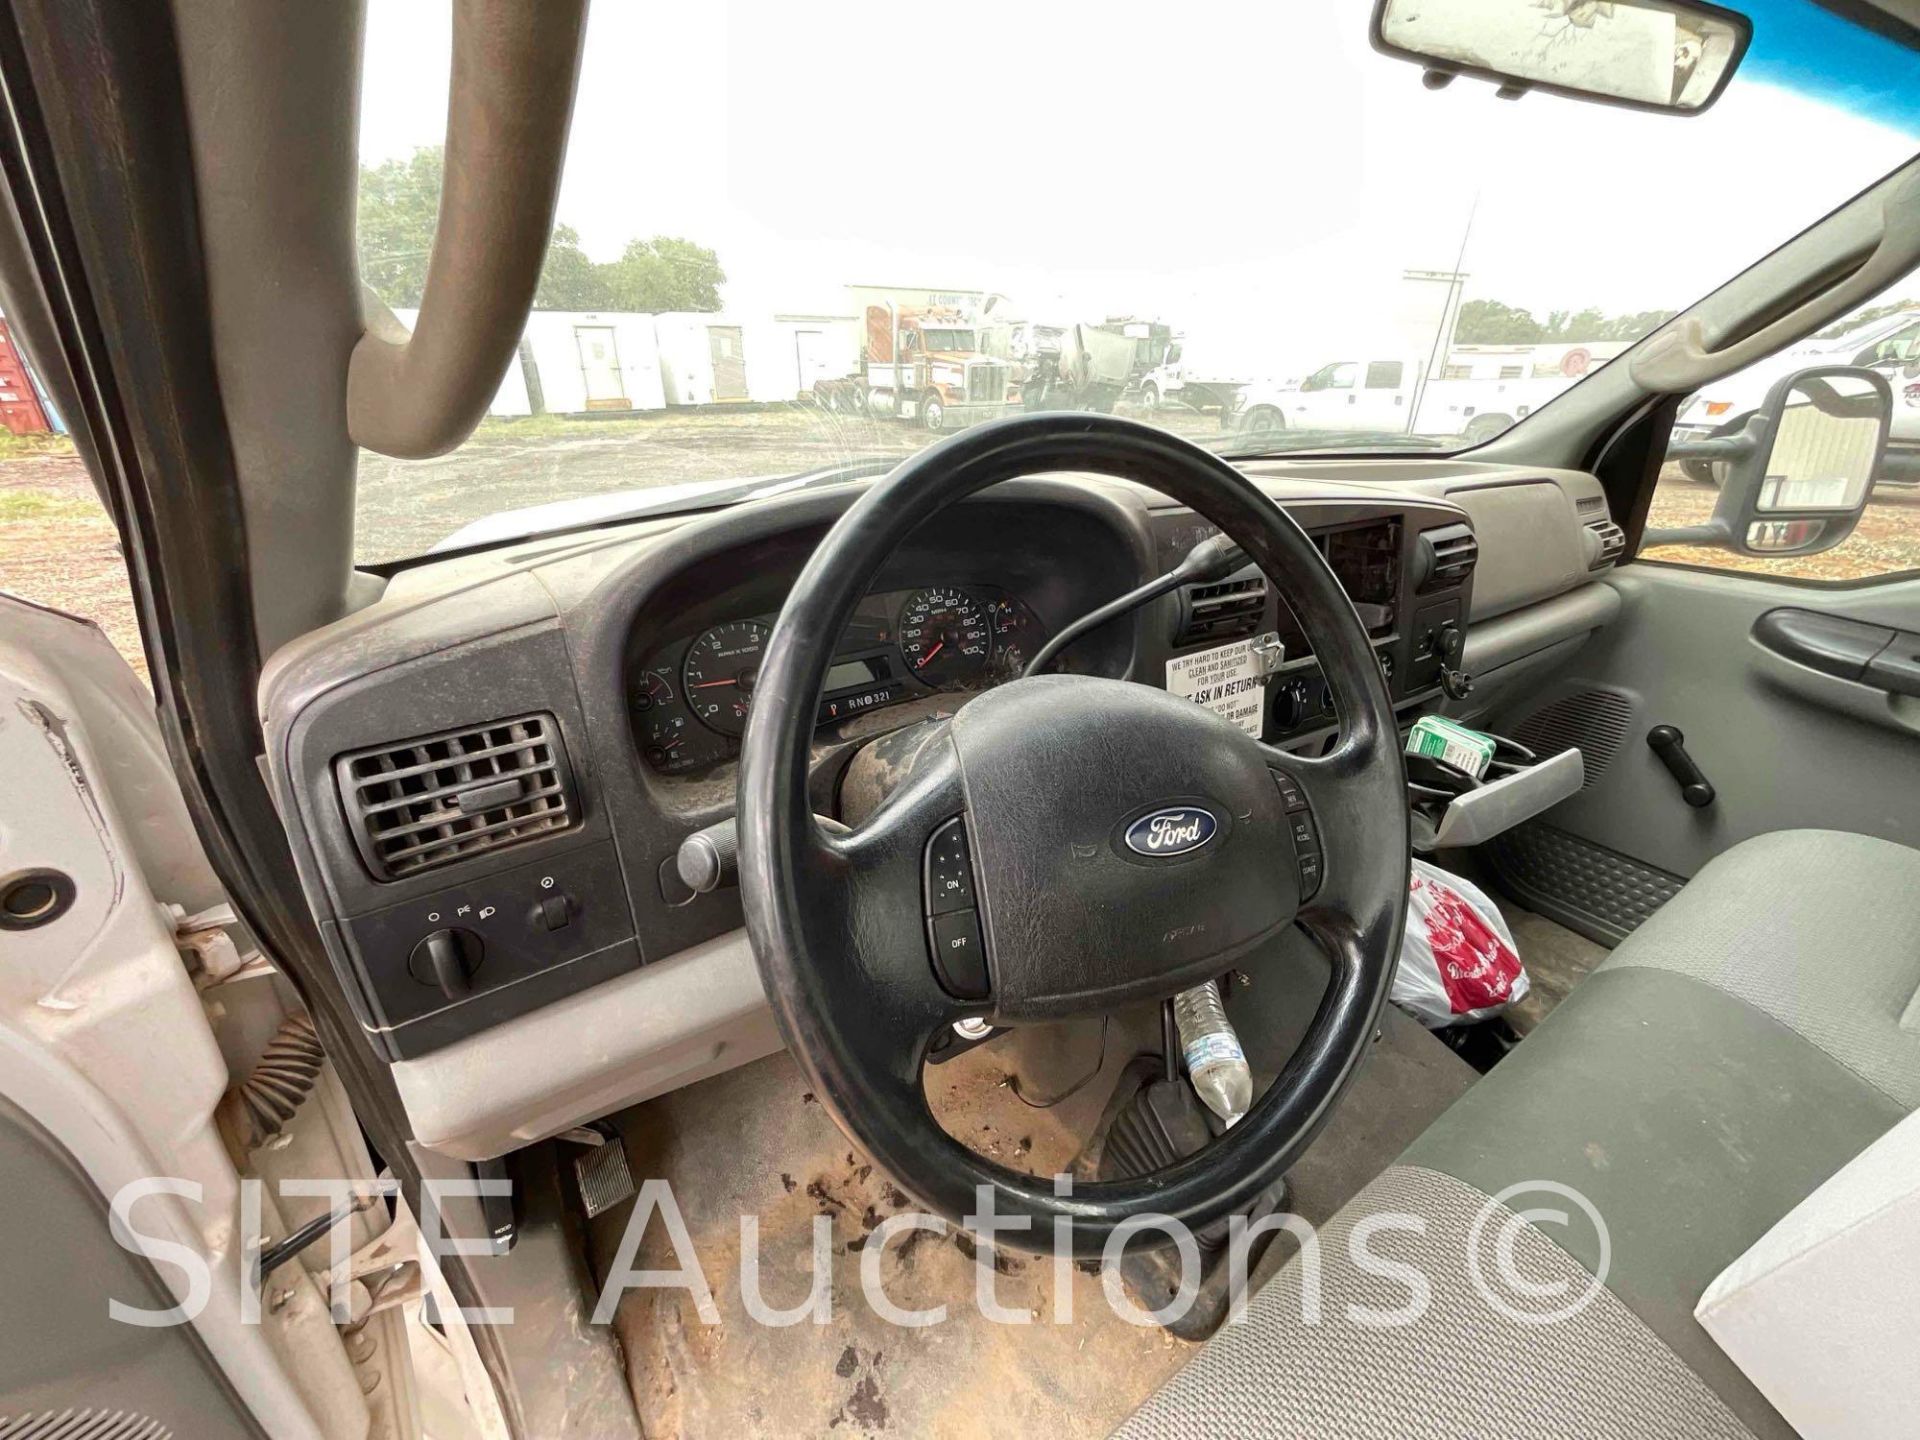 2006 Ford F550 S/A Waste Truck - Image 20 of 22